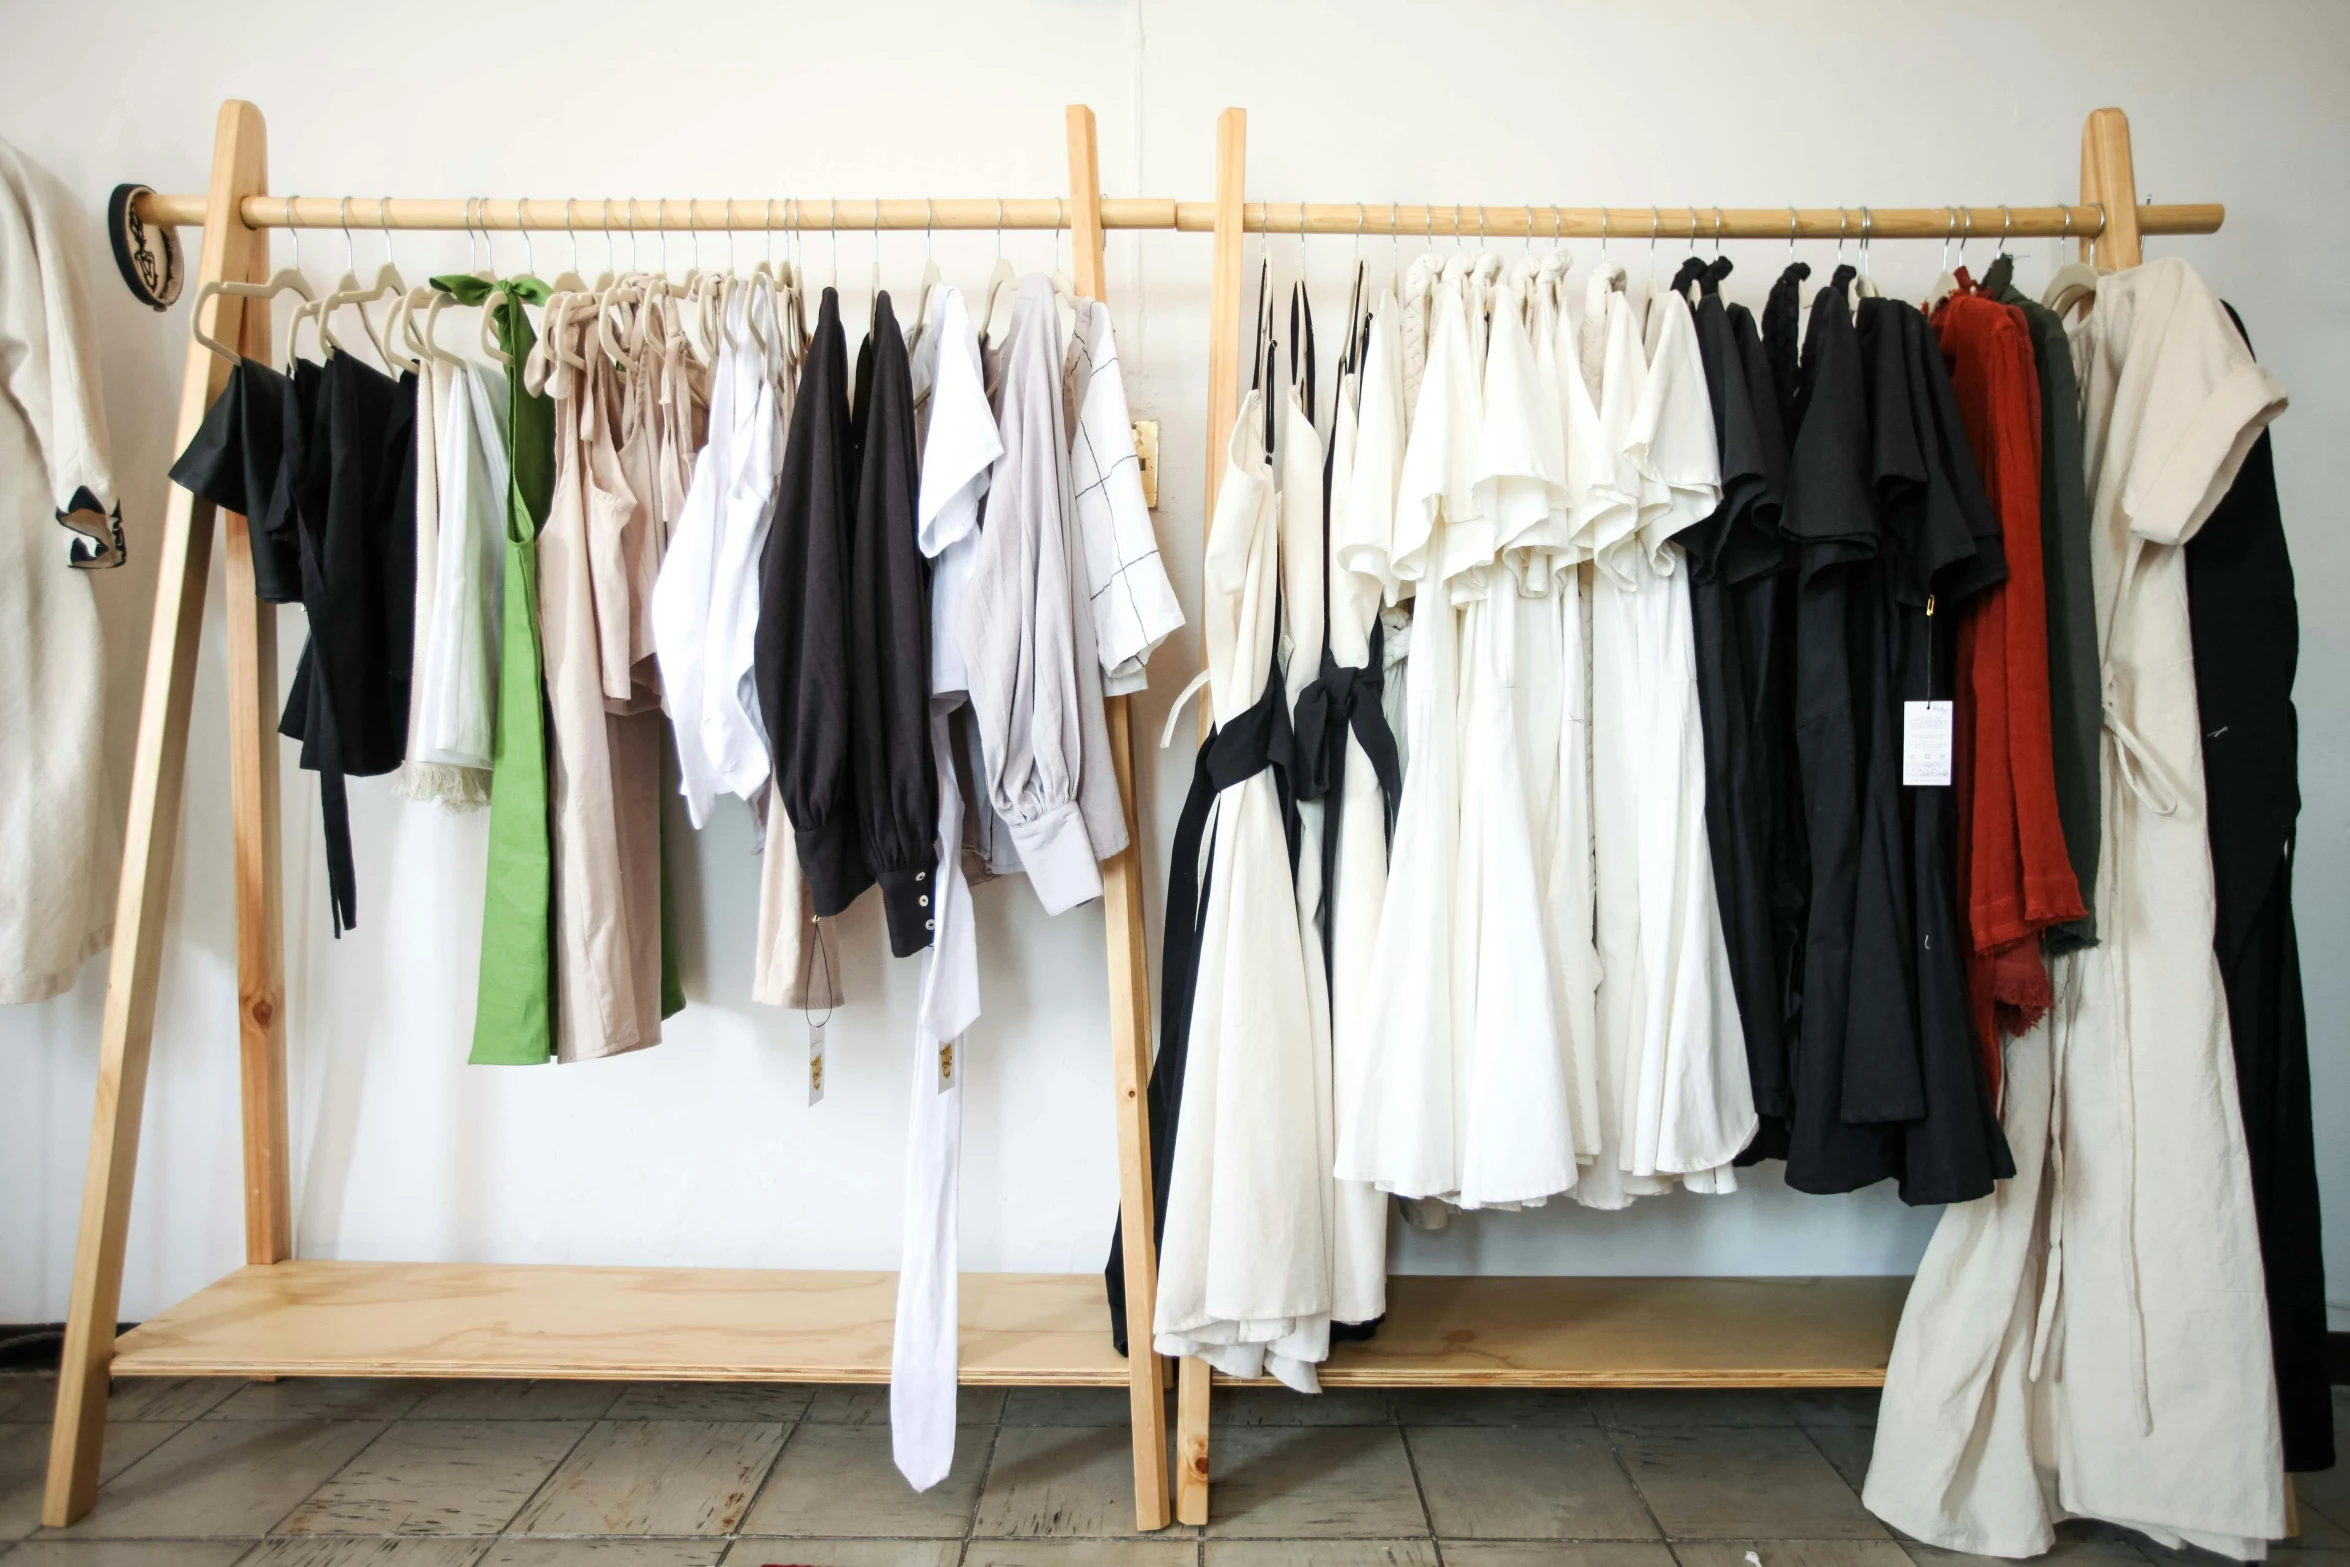 clothes are hanged on clothes rails and next to clothing rack